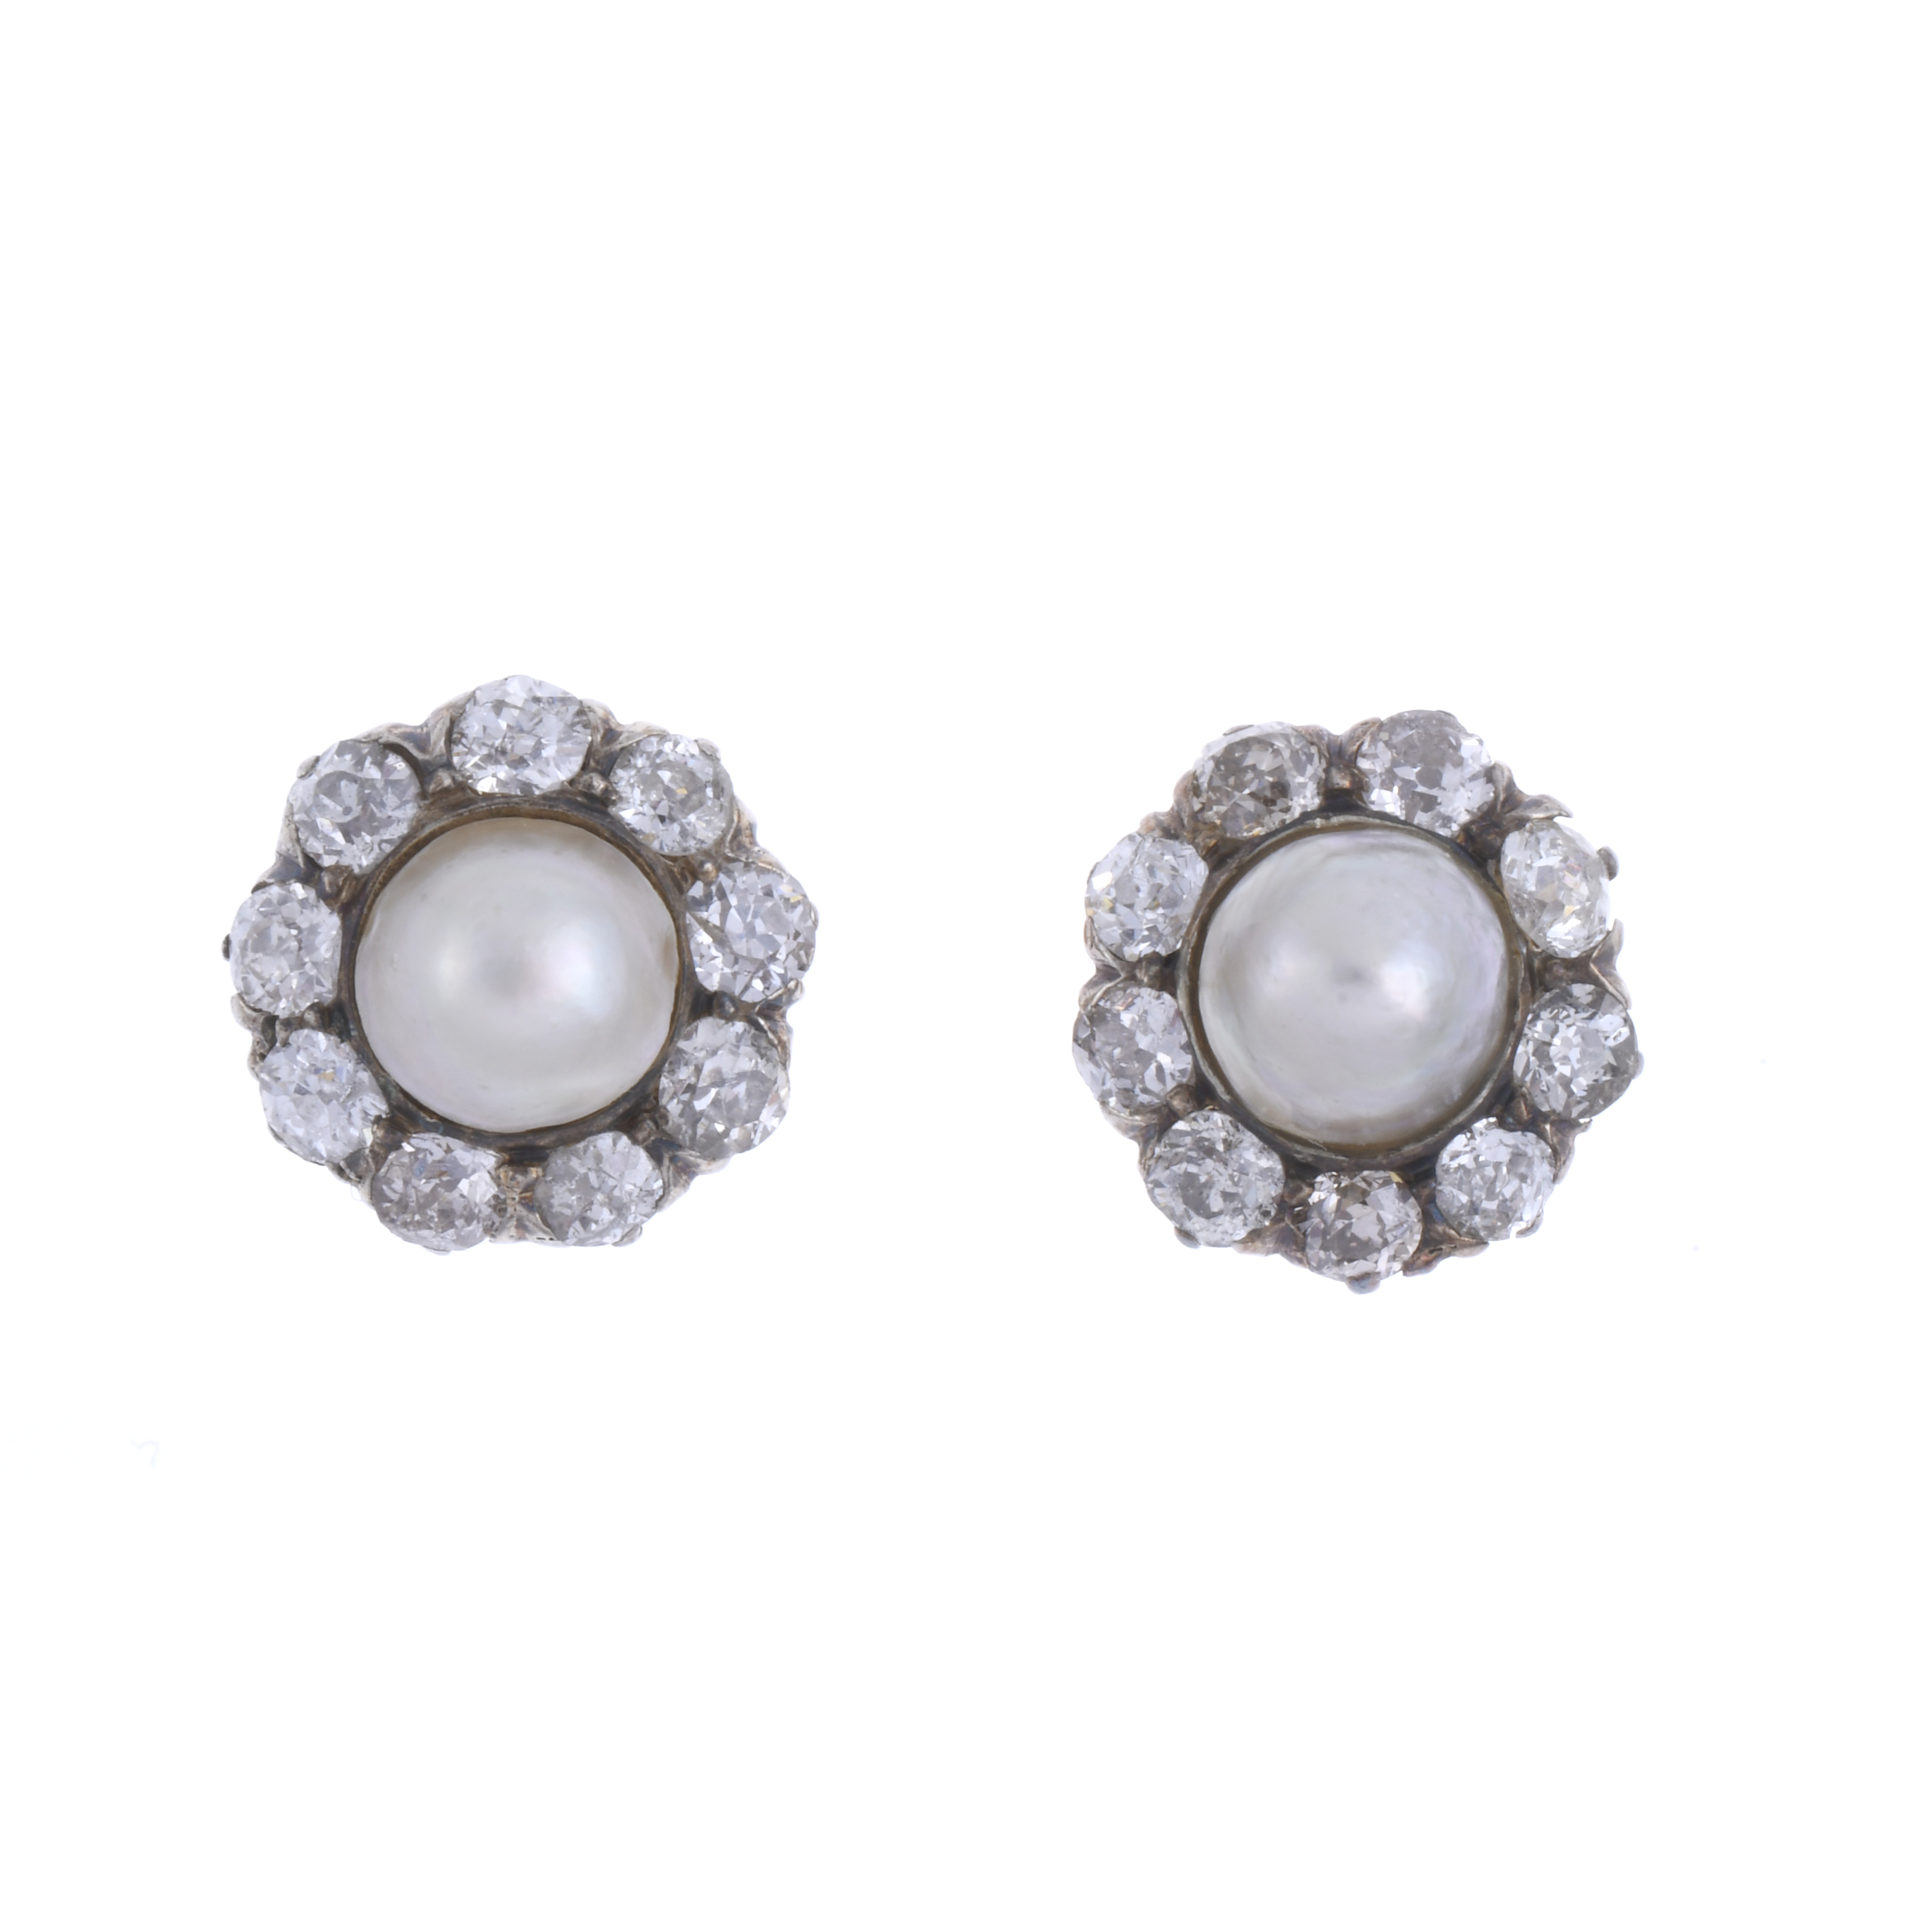 ANTIQUE DIAMONDS AND PEARLS ROSETTE EARRINGS.